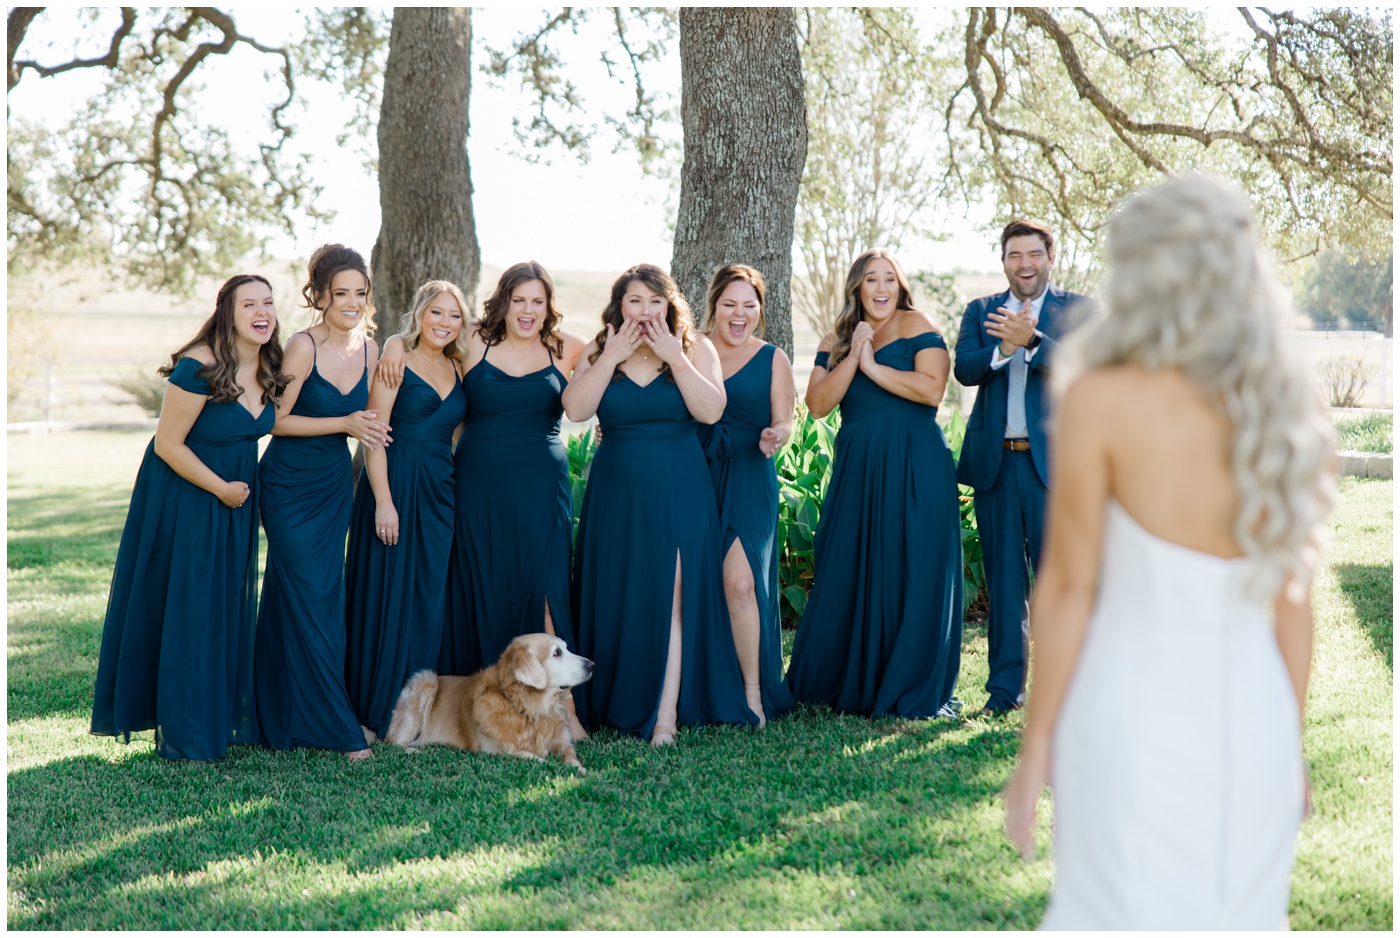 Houston Wedding Photographer | Bridesmaids react excitedly to seeing the bride on her wedding day.